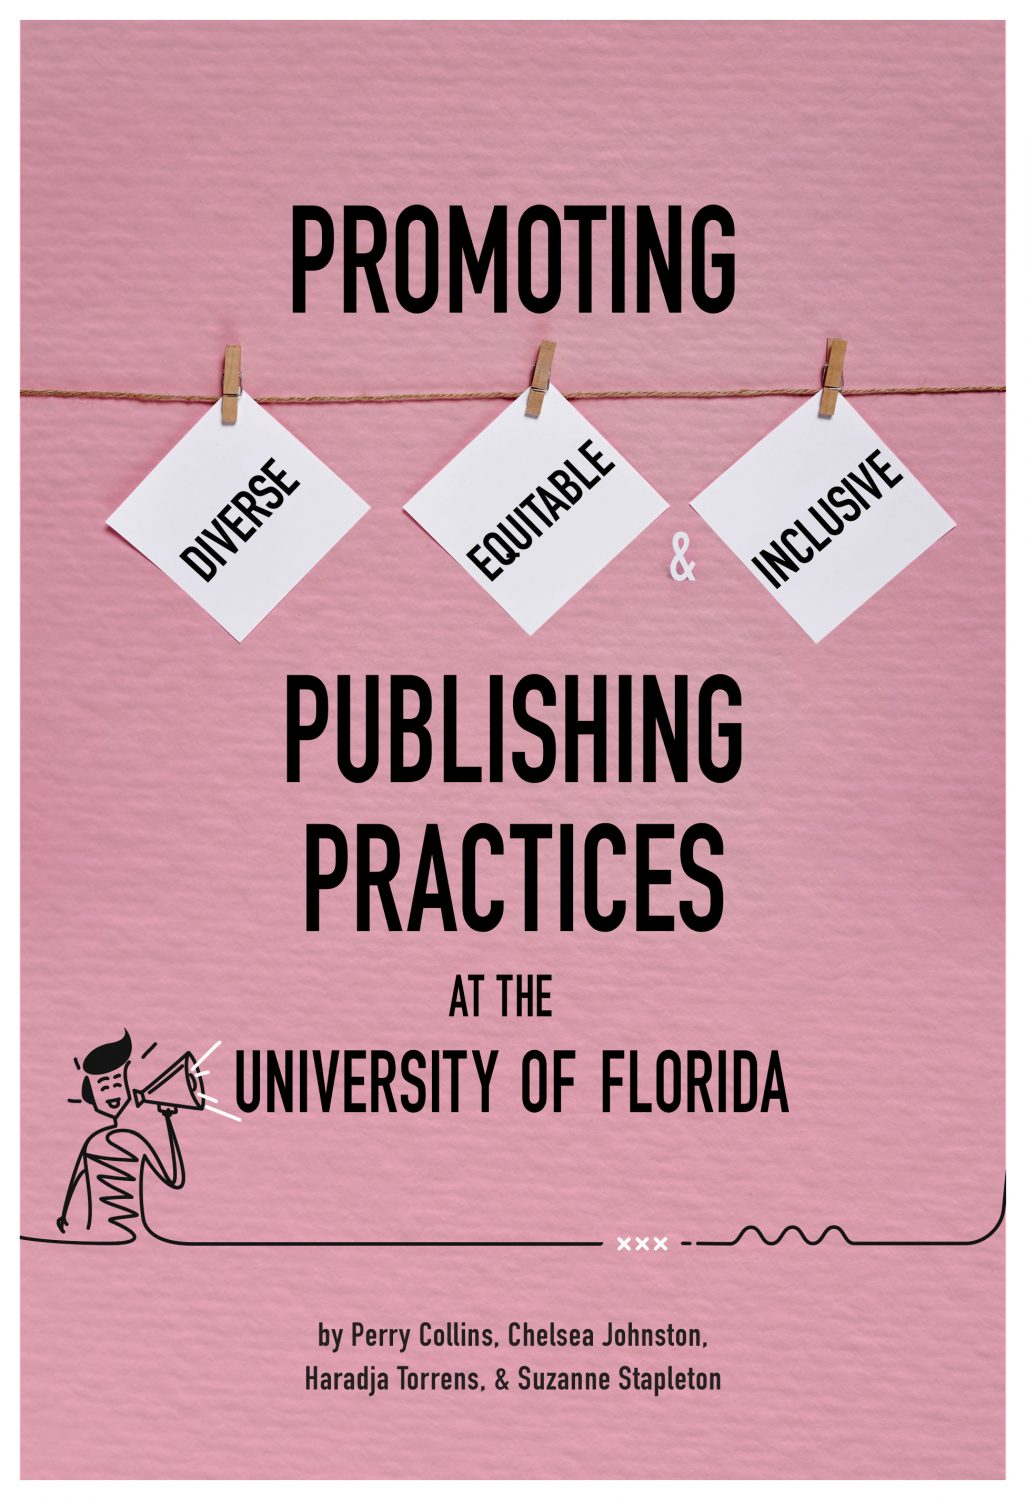 Cover image for Promoting Diverse, Equitable, & Inclusive Publishing Practices at the University of Florida